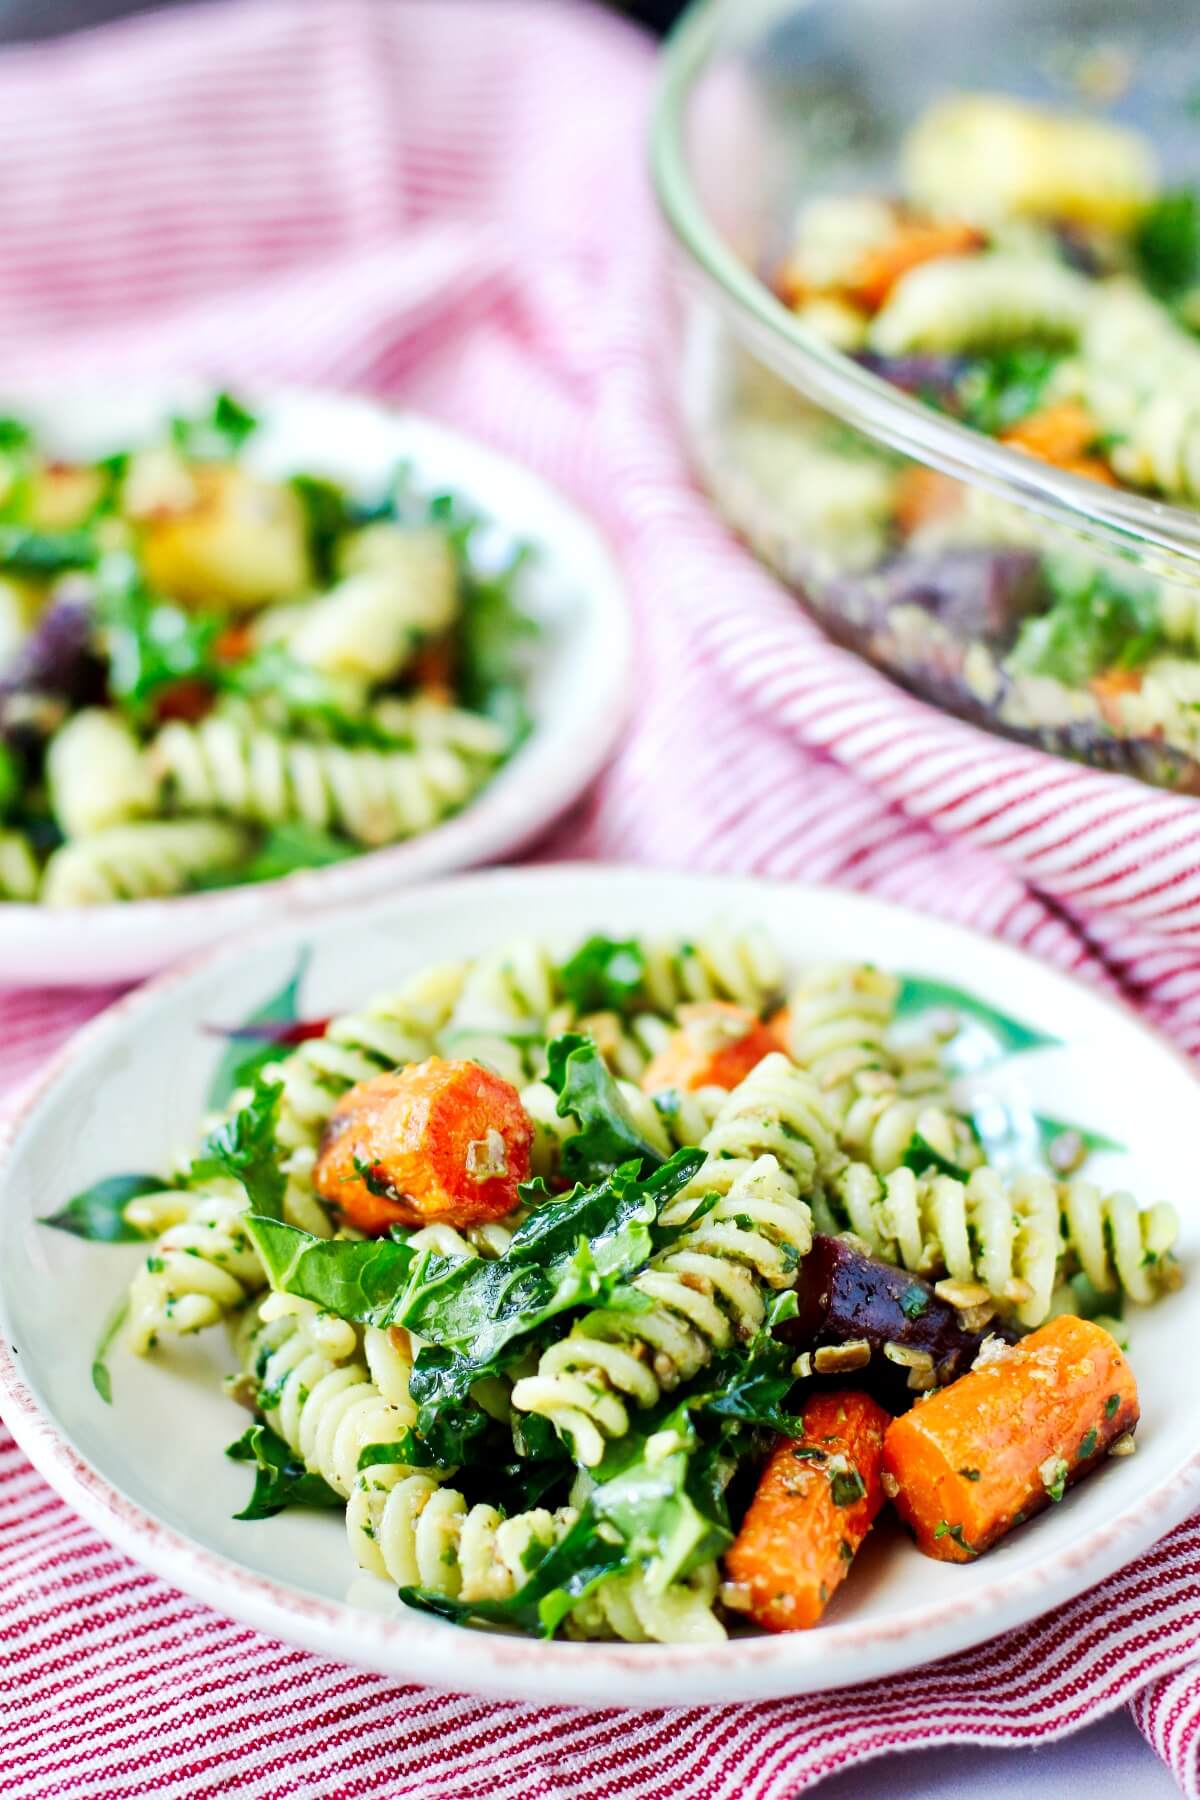 Pasta Salad with Roasted Carrots and Kale | Karen's Kitchen Stories